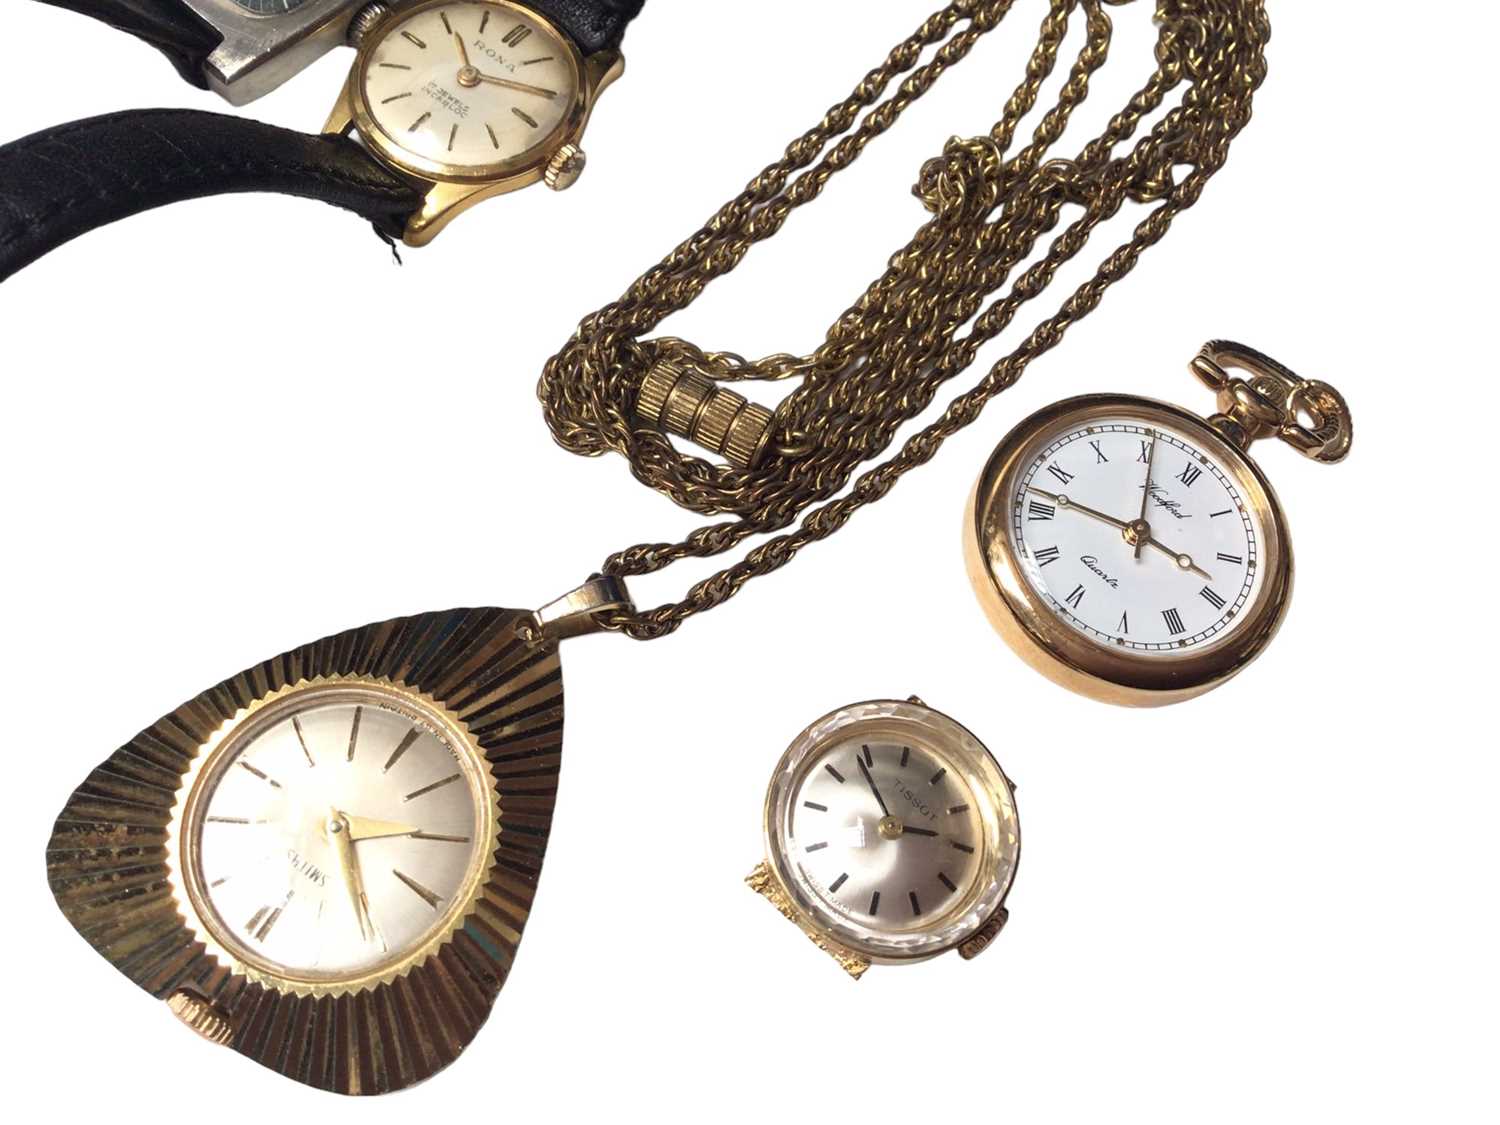 18ct gold cased ladies Tissot watch, 1970s Longines wristwatch, two other wristwatches, gold plated - Image 3 of 4